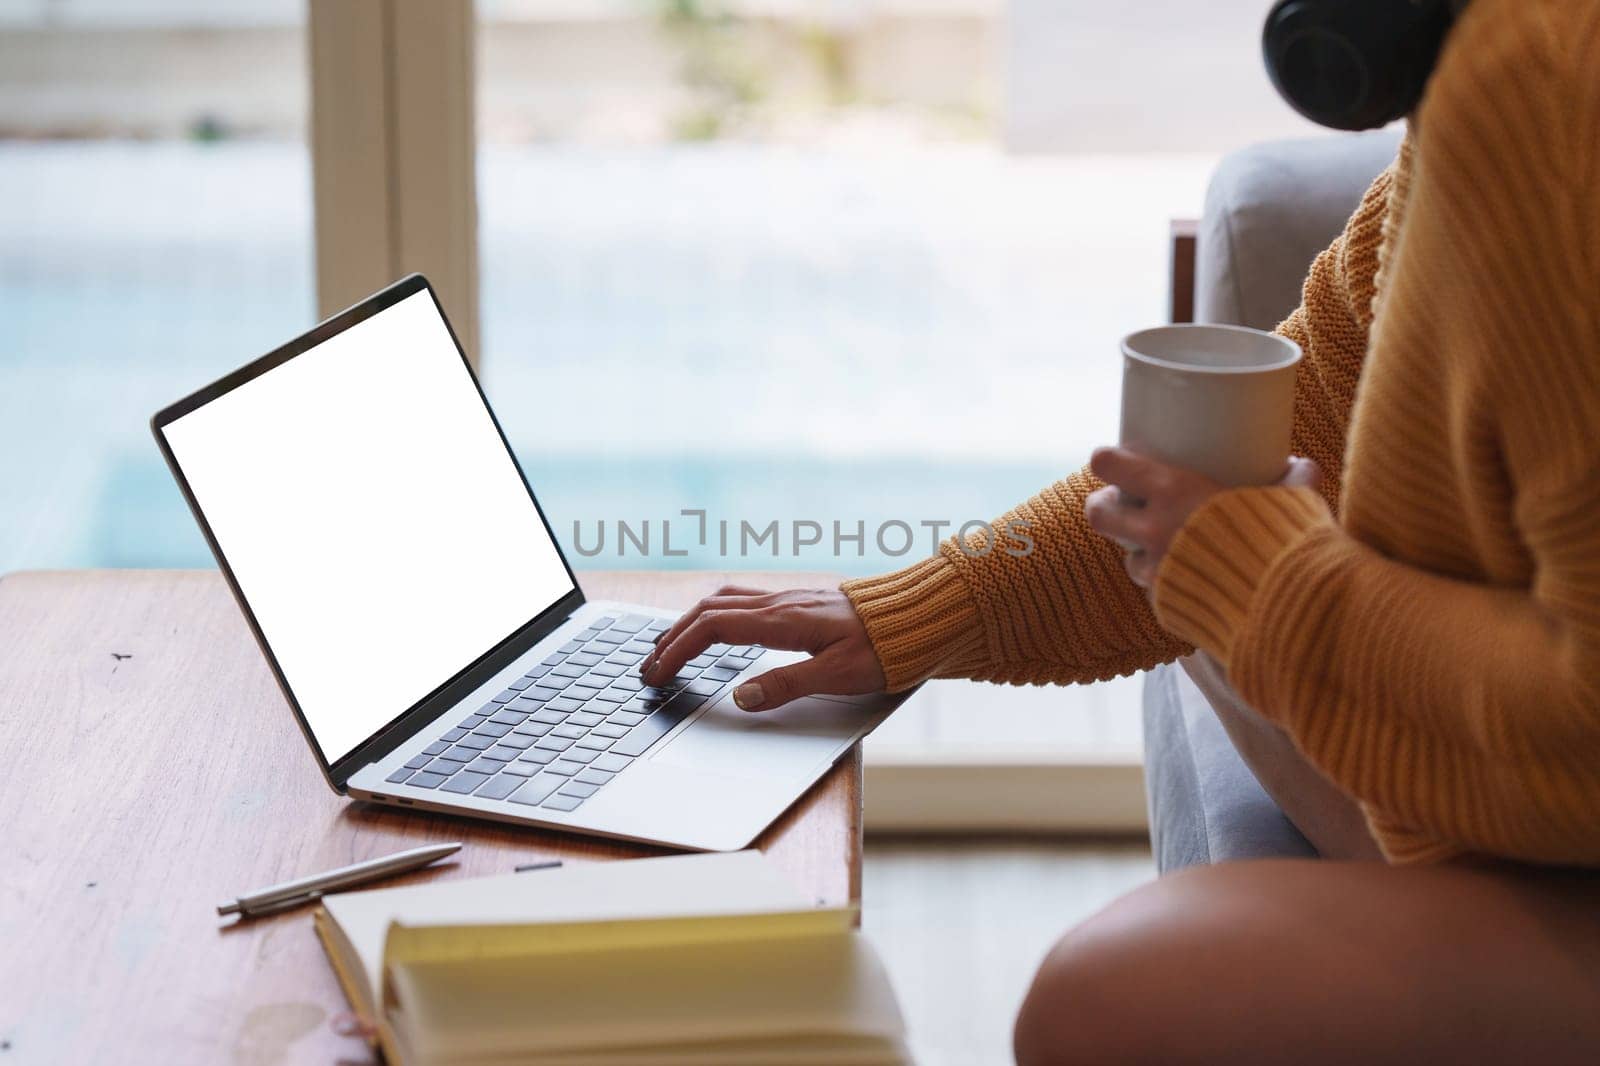 Online education, e-learning. Asian woman in stylish casual clothes, studying using a laptop, listening to online lecture, taking notes, online study at home.